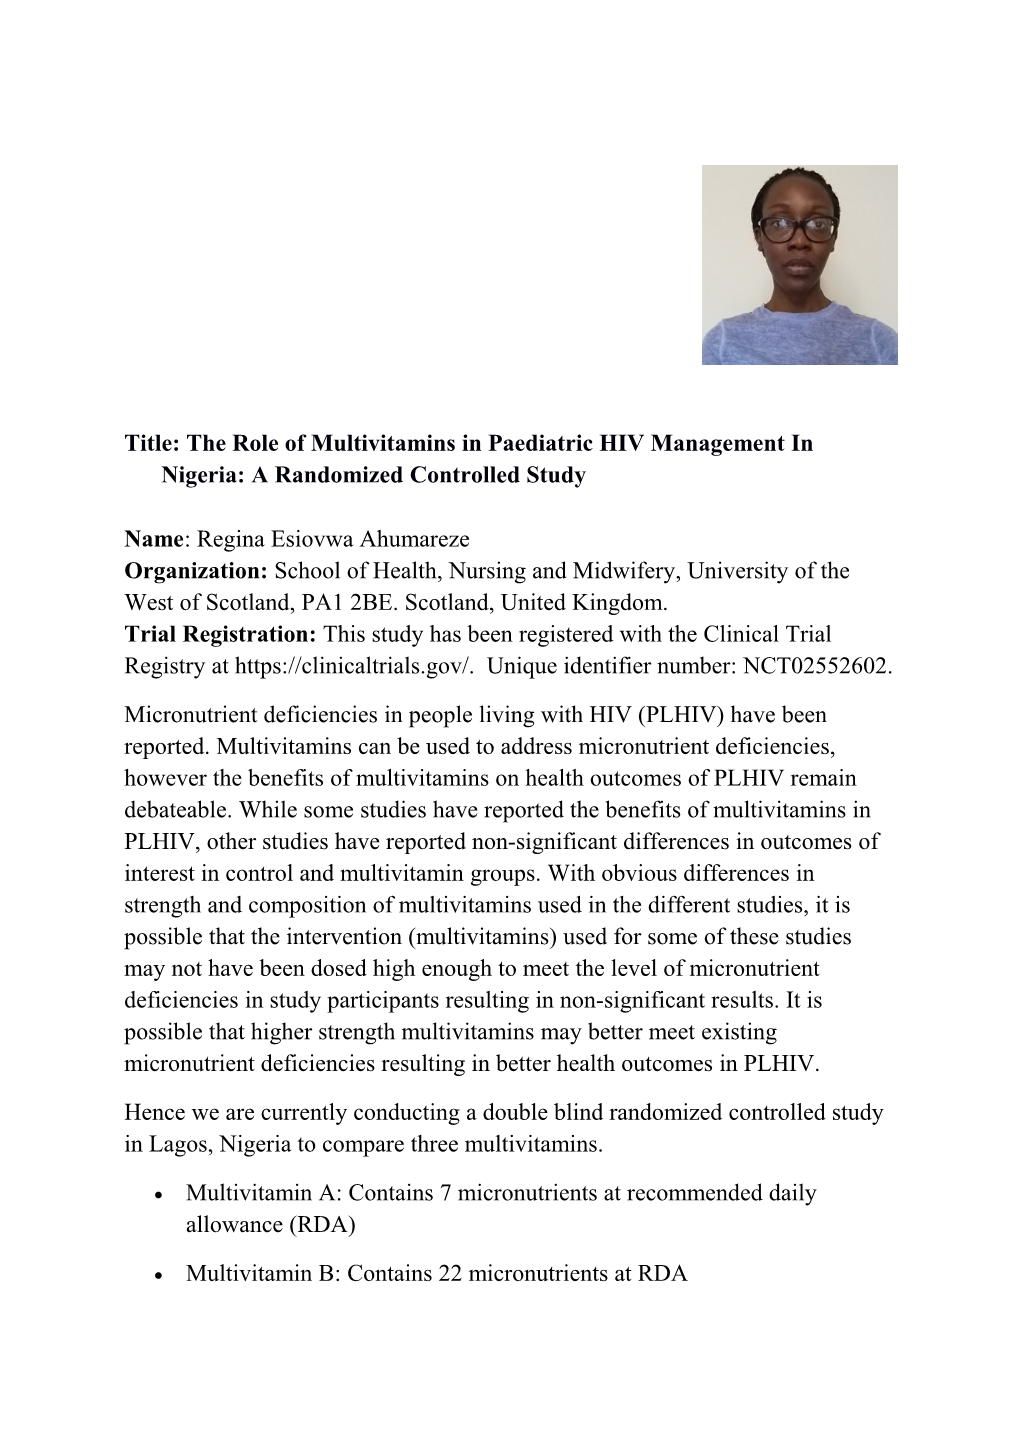 Title: the Role of Multivitamins in Paediatric HIV Management in Nigeria: a Randomized